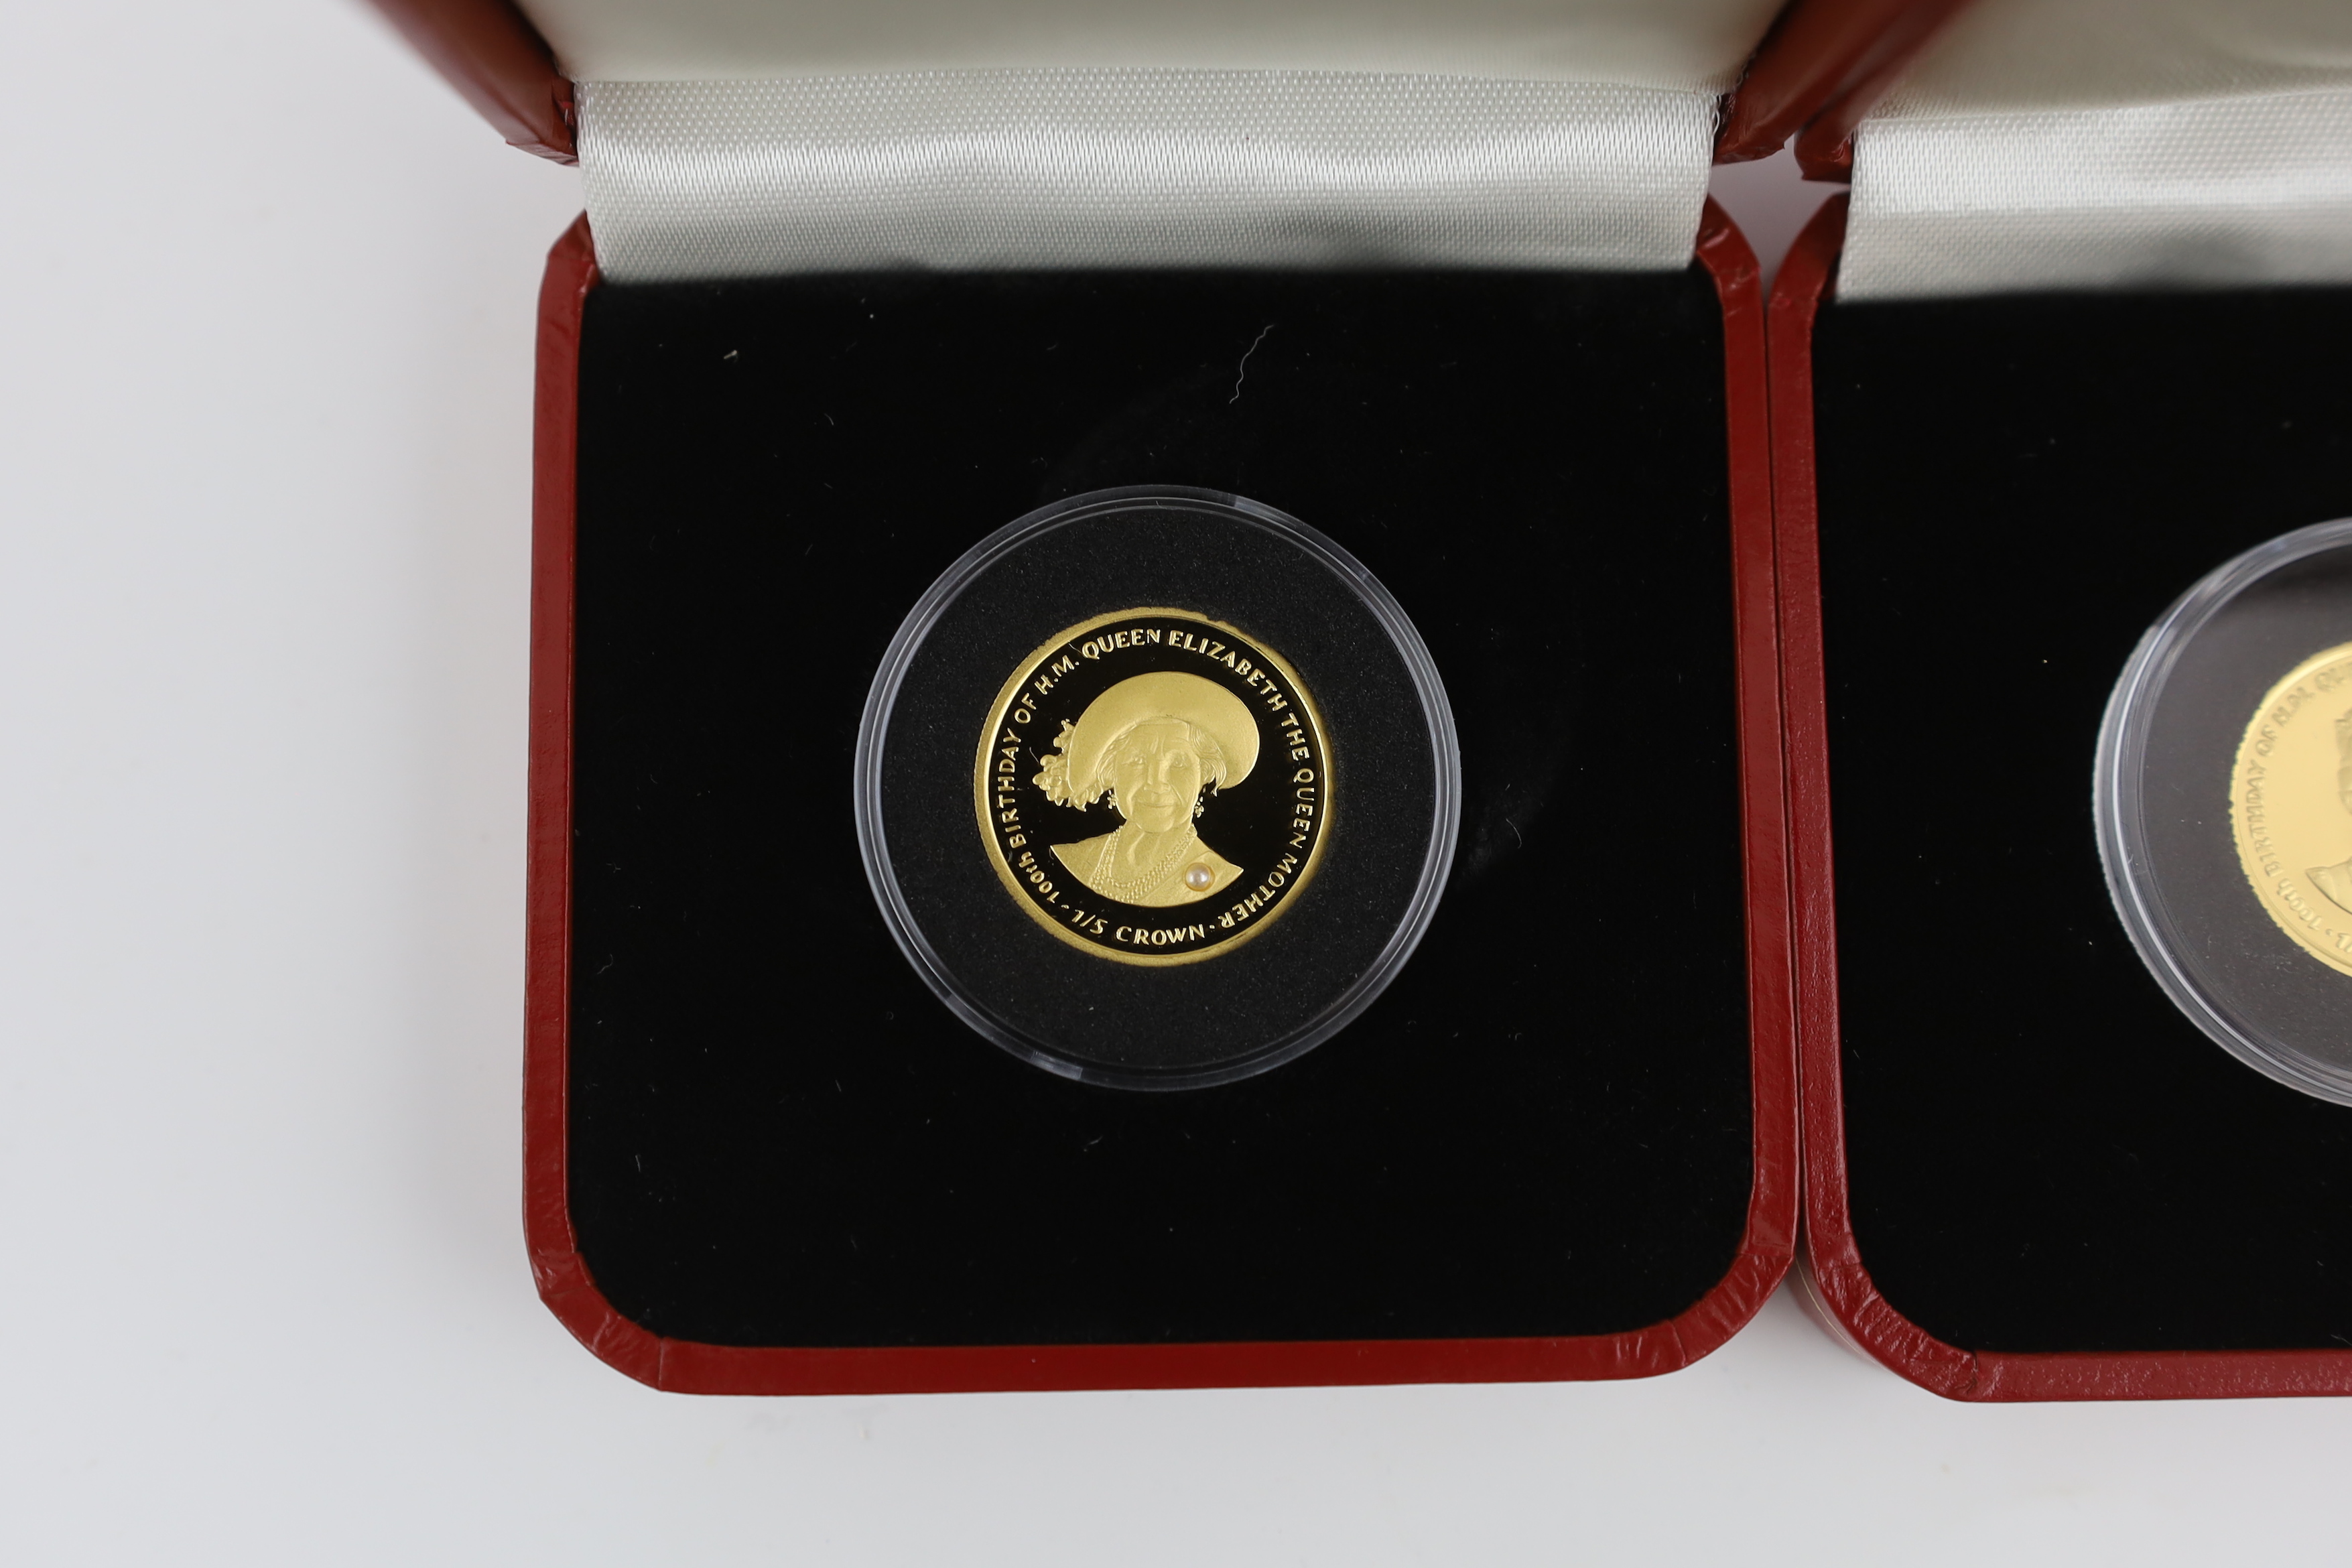 Gold coins - Two Pobjoy mint Isle of Man proof gold 1/5 crown coins, each 6.22g, 999.9/1000 purity